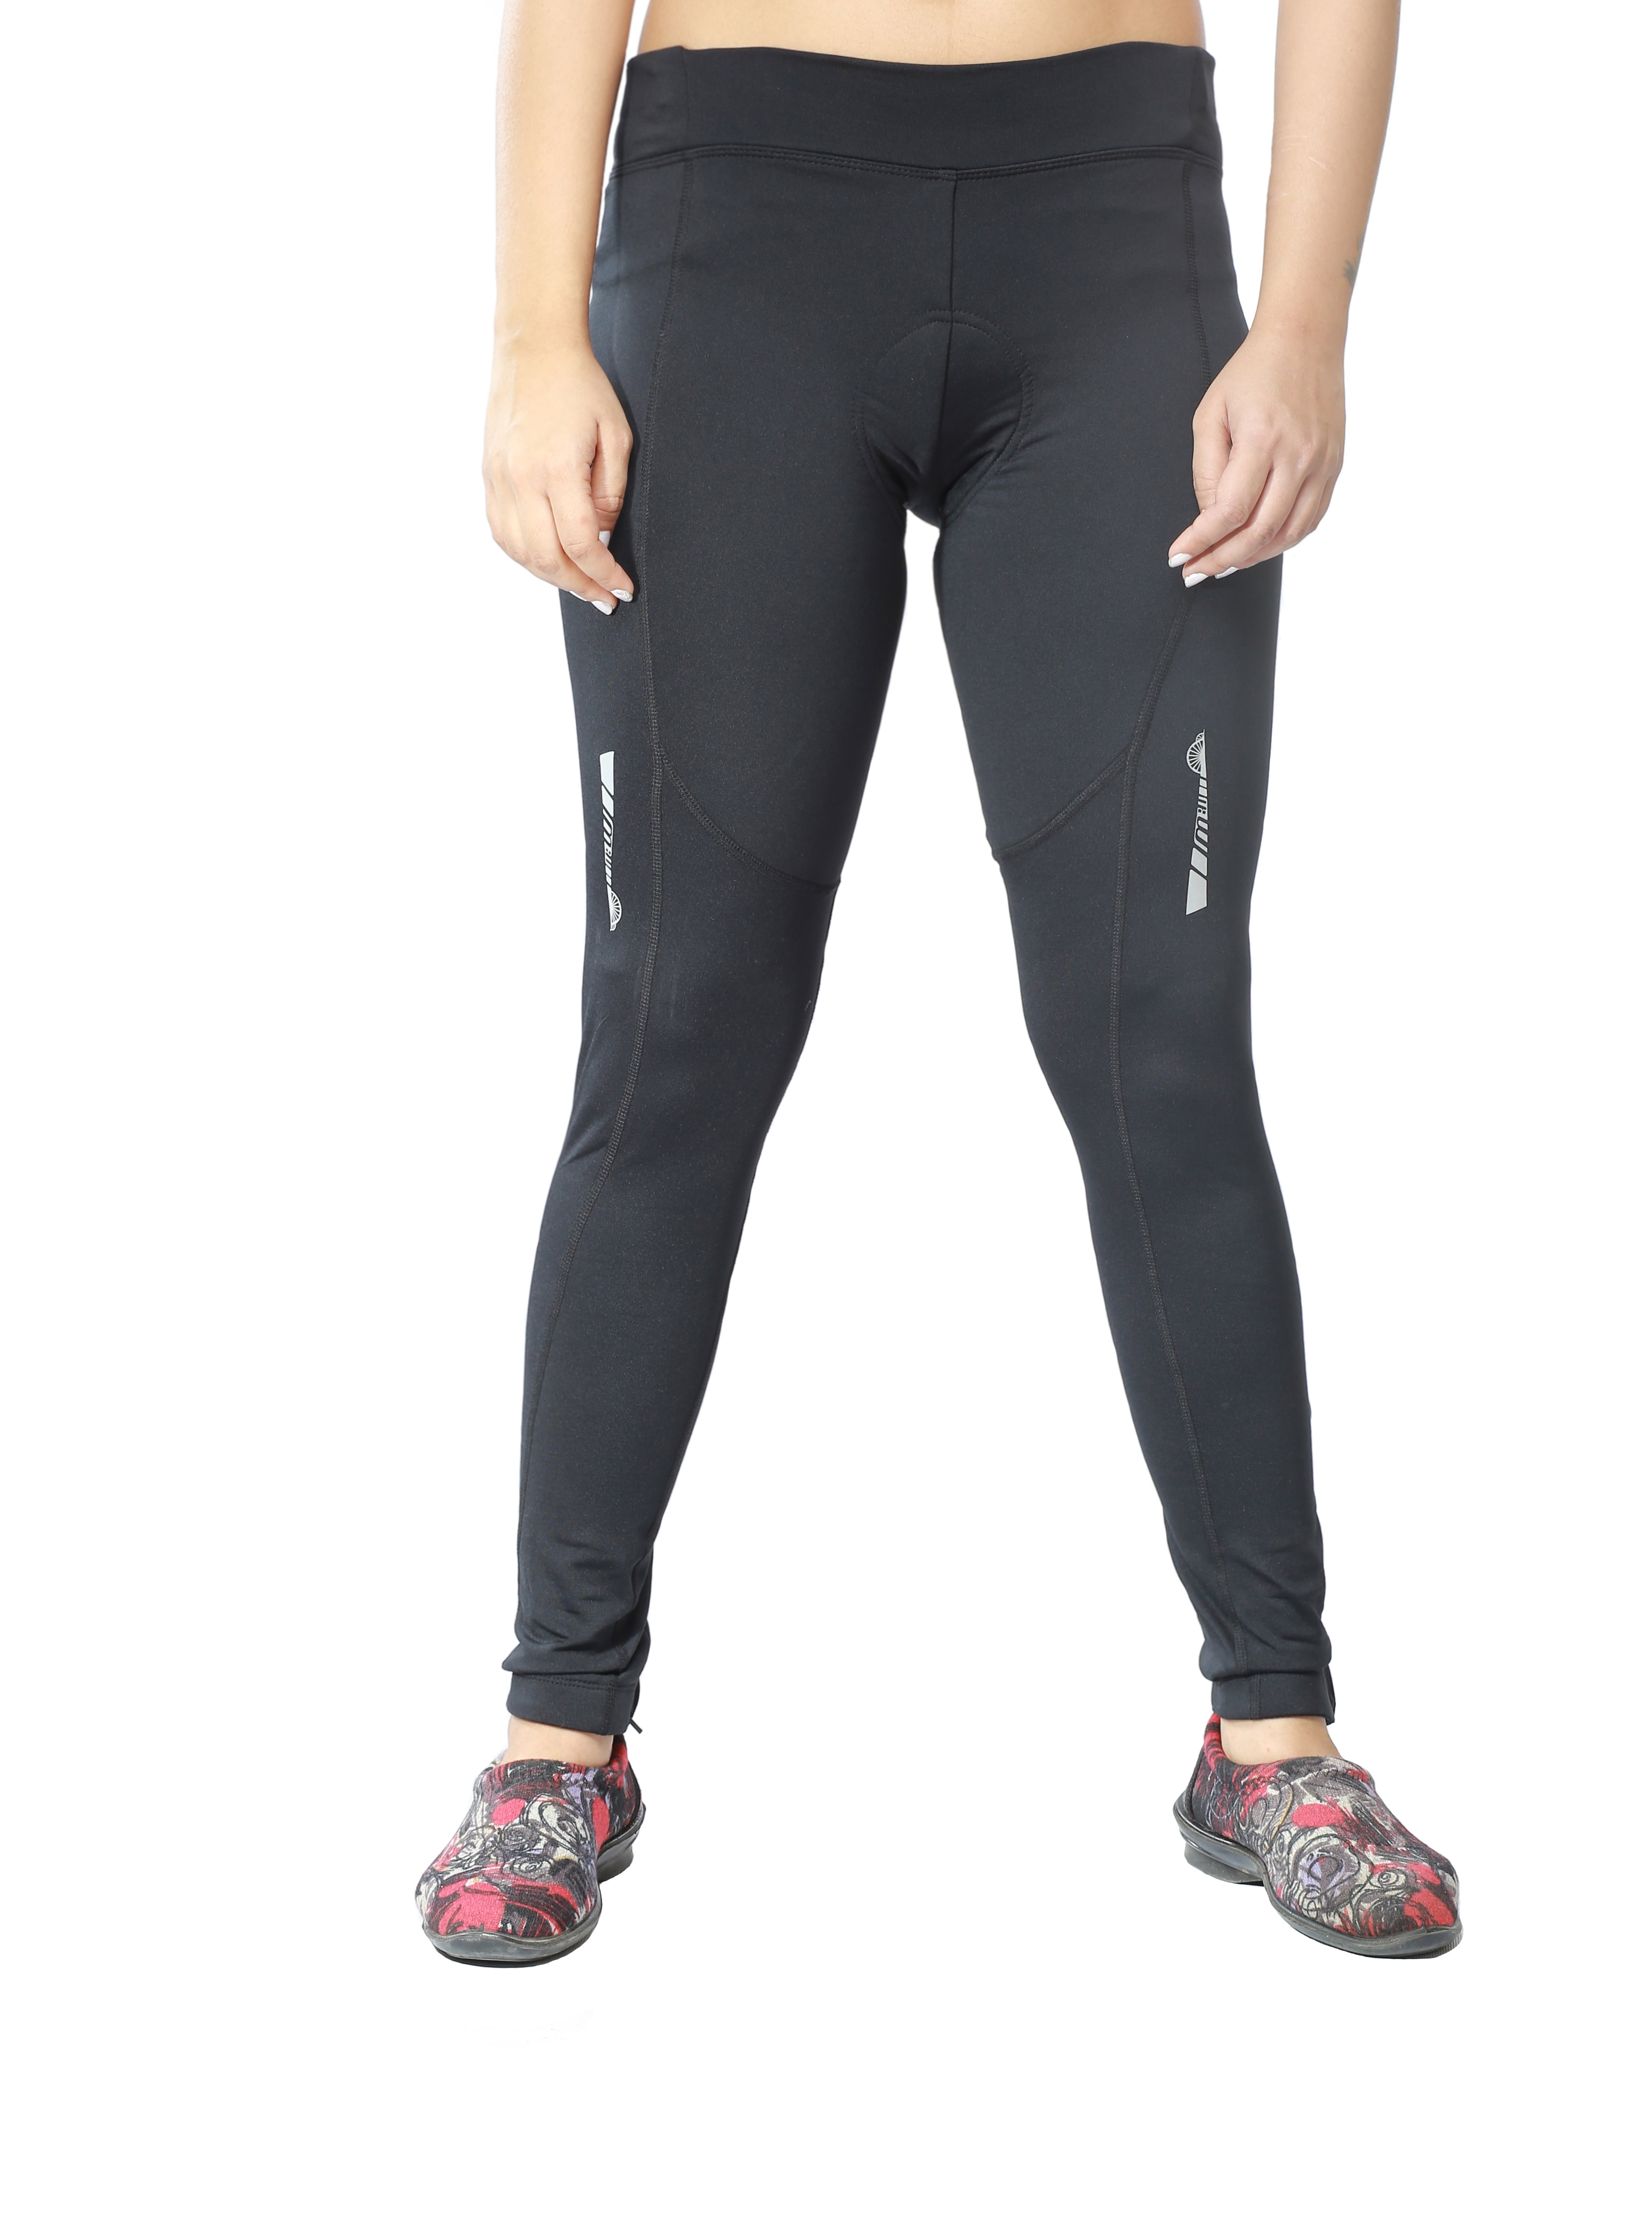 Women's 3D Gel Padded Semi Compression Thermal Cycling Pants Tights Ankle  Zipper and Reflective Elements 